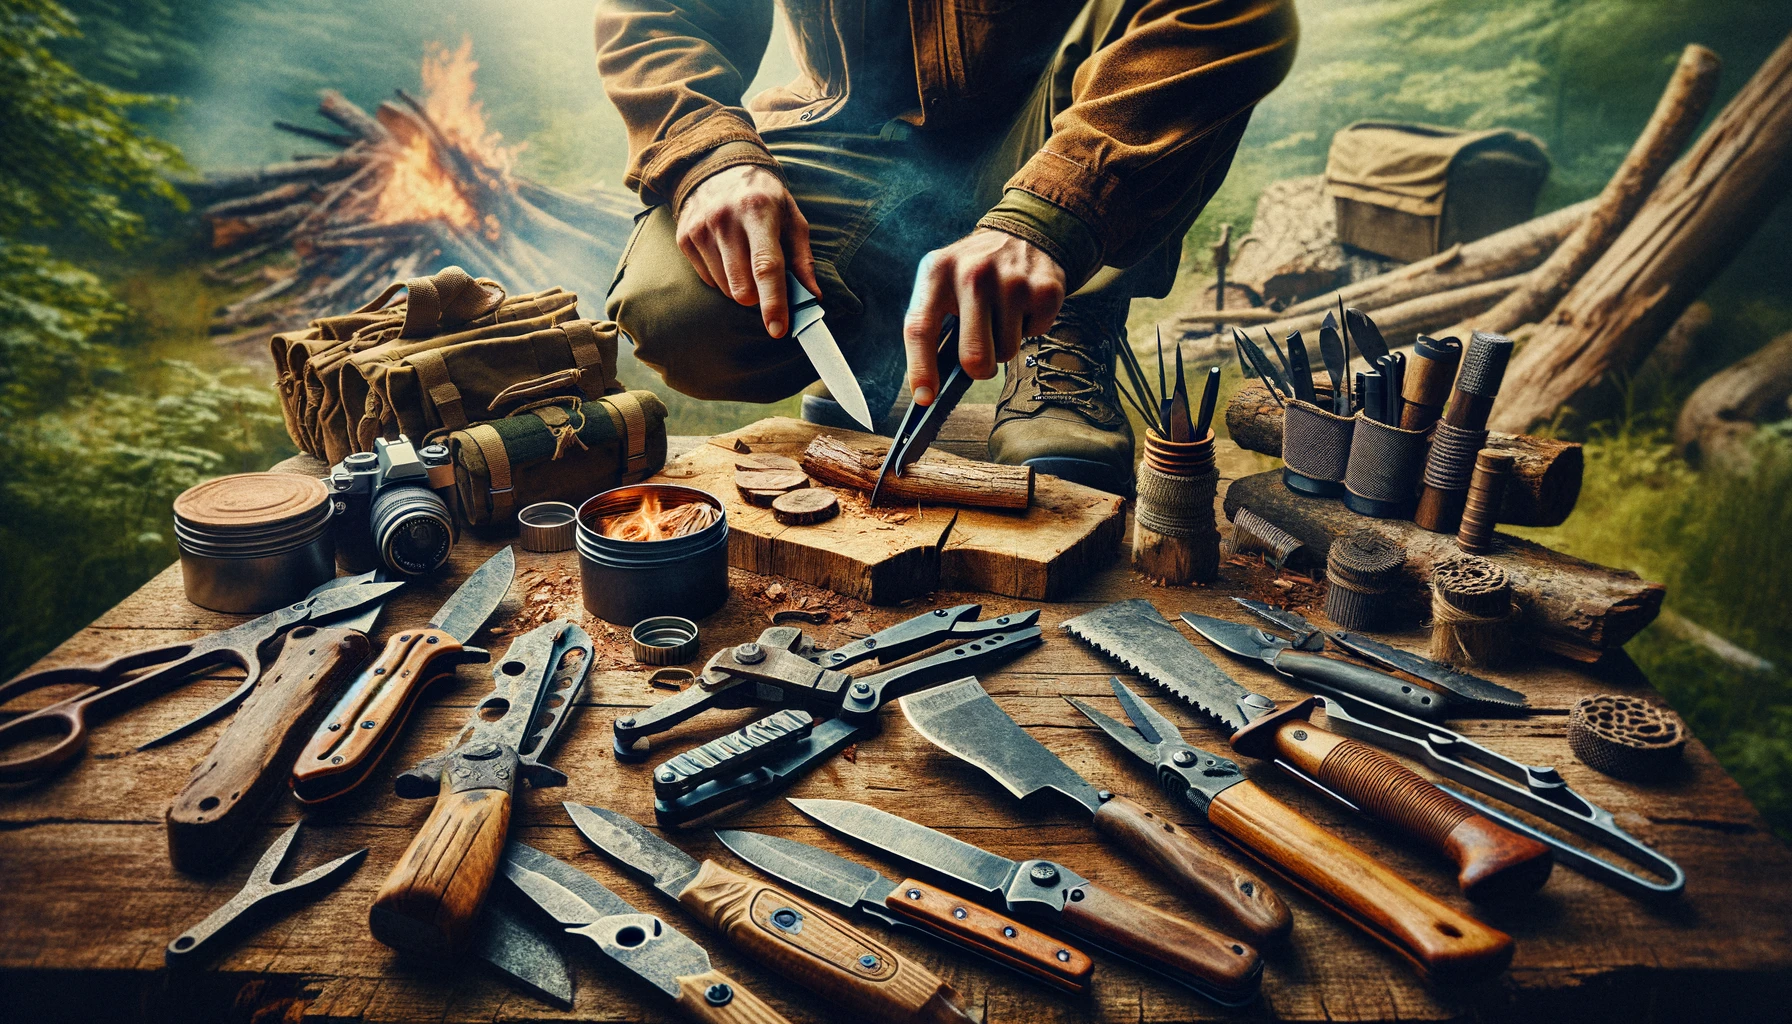 A detailed depiction of individuals skillfully using a variety of bushcraft tools and knives for carving wood, preparing food, creating fire starters, and constructing shelters in a wilderness setting. The image showcases the precision and craftsmanship required for mastery of these essential survival tools, highlighting the essence of self-reliance and outdoor survival.